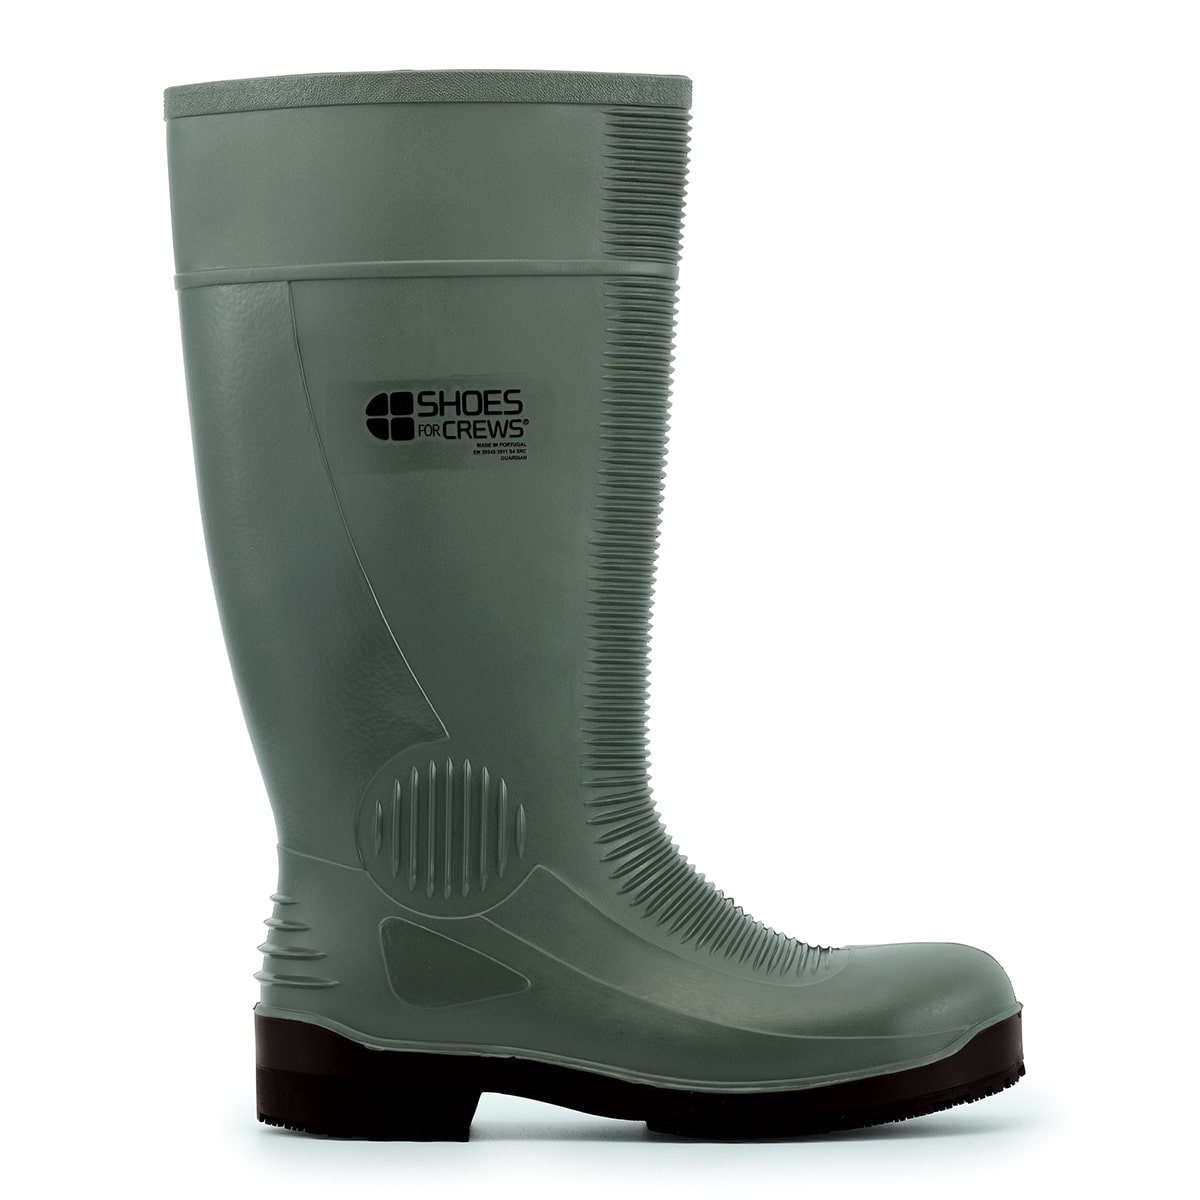 The Guardian Green from Shoes For Crews waterproof wellington boots offers superior slip resistance on a variety of flooring surfaces, seen from the right.